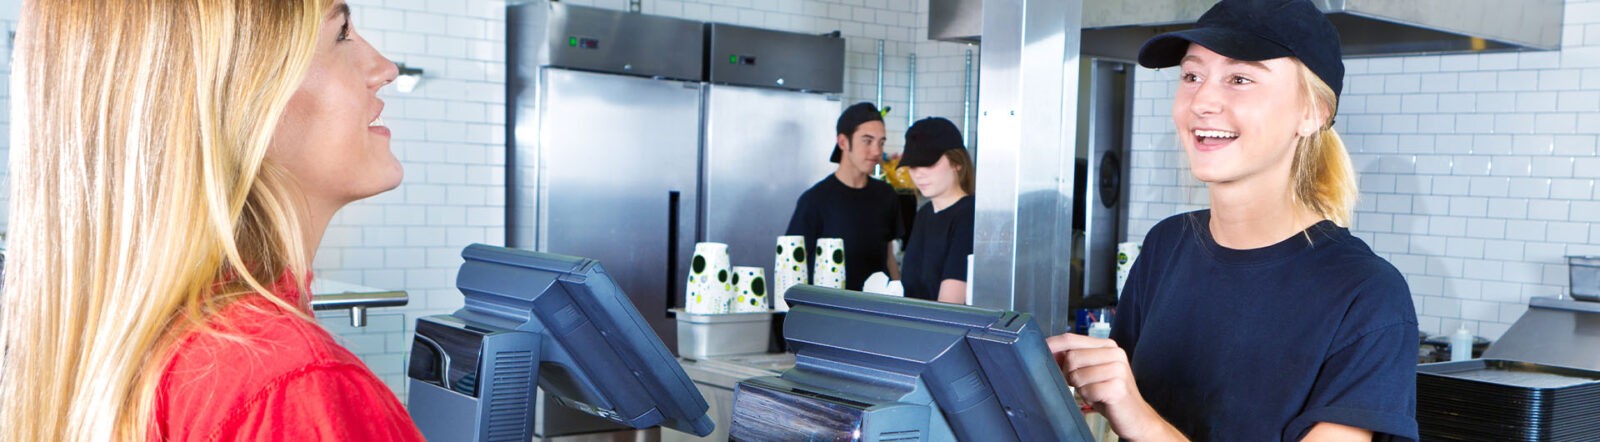 QSR employee serving an customer at the POS counter.